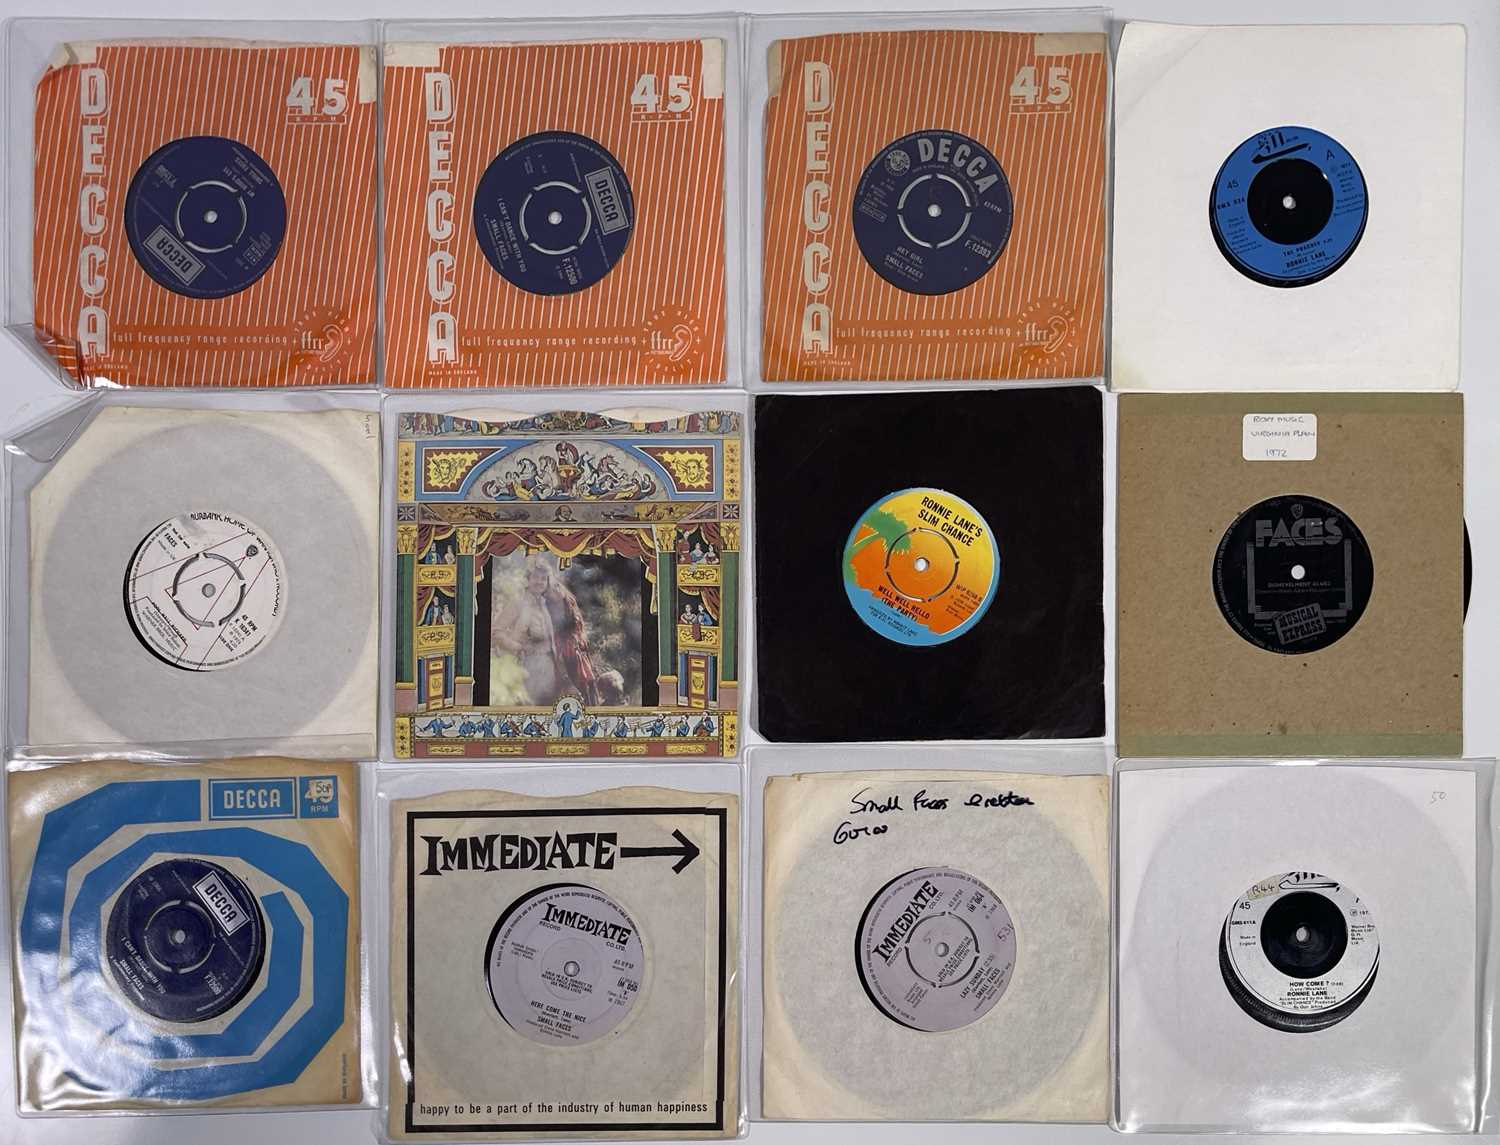 DANNY'S SINGLES - SMALL FACES AND RELATED.